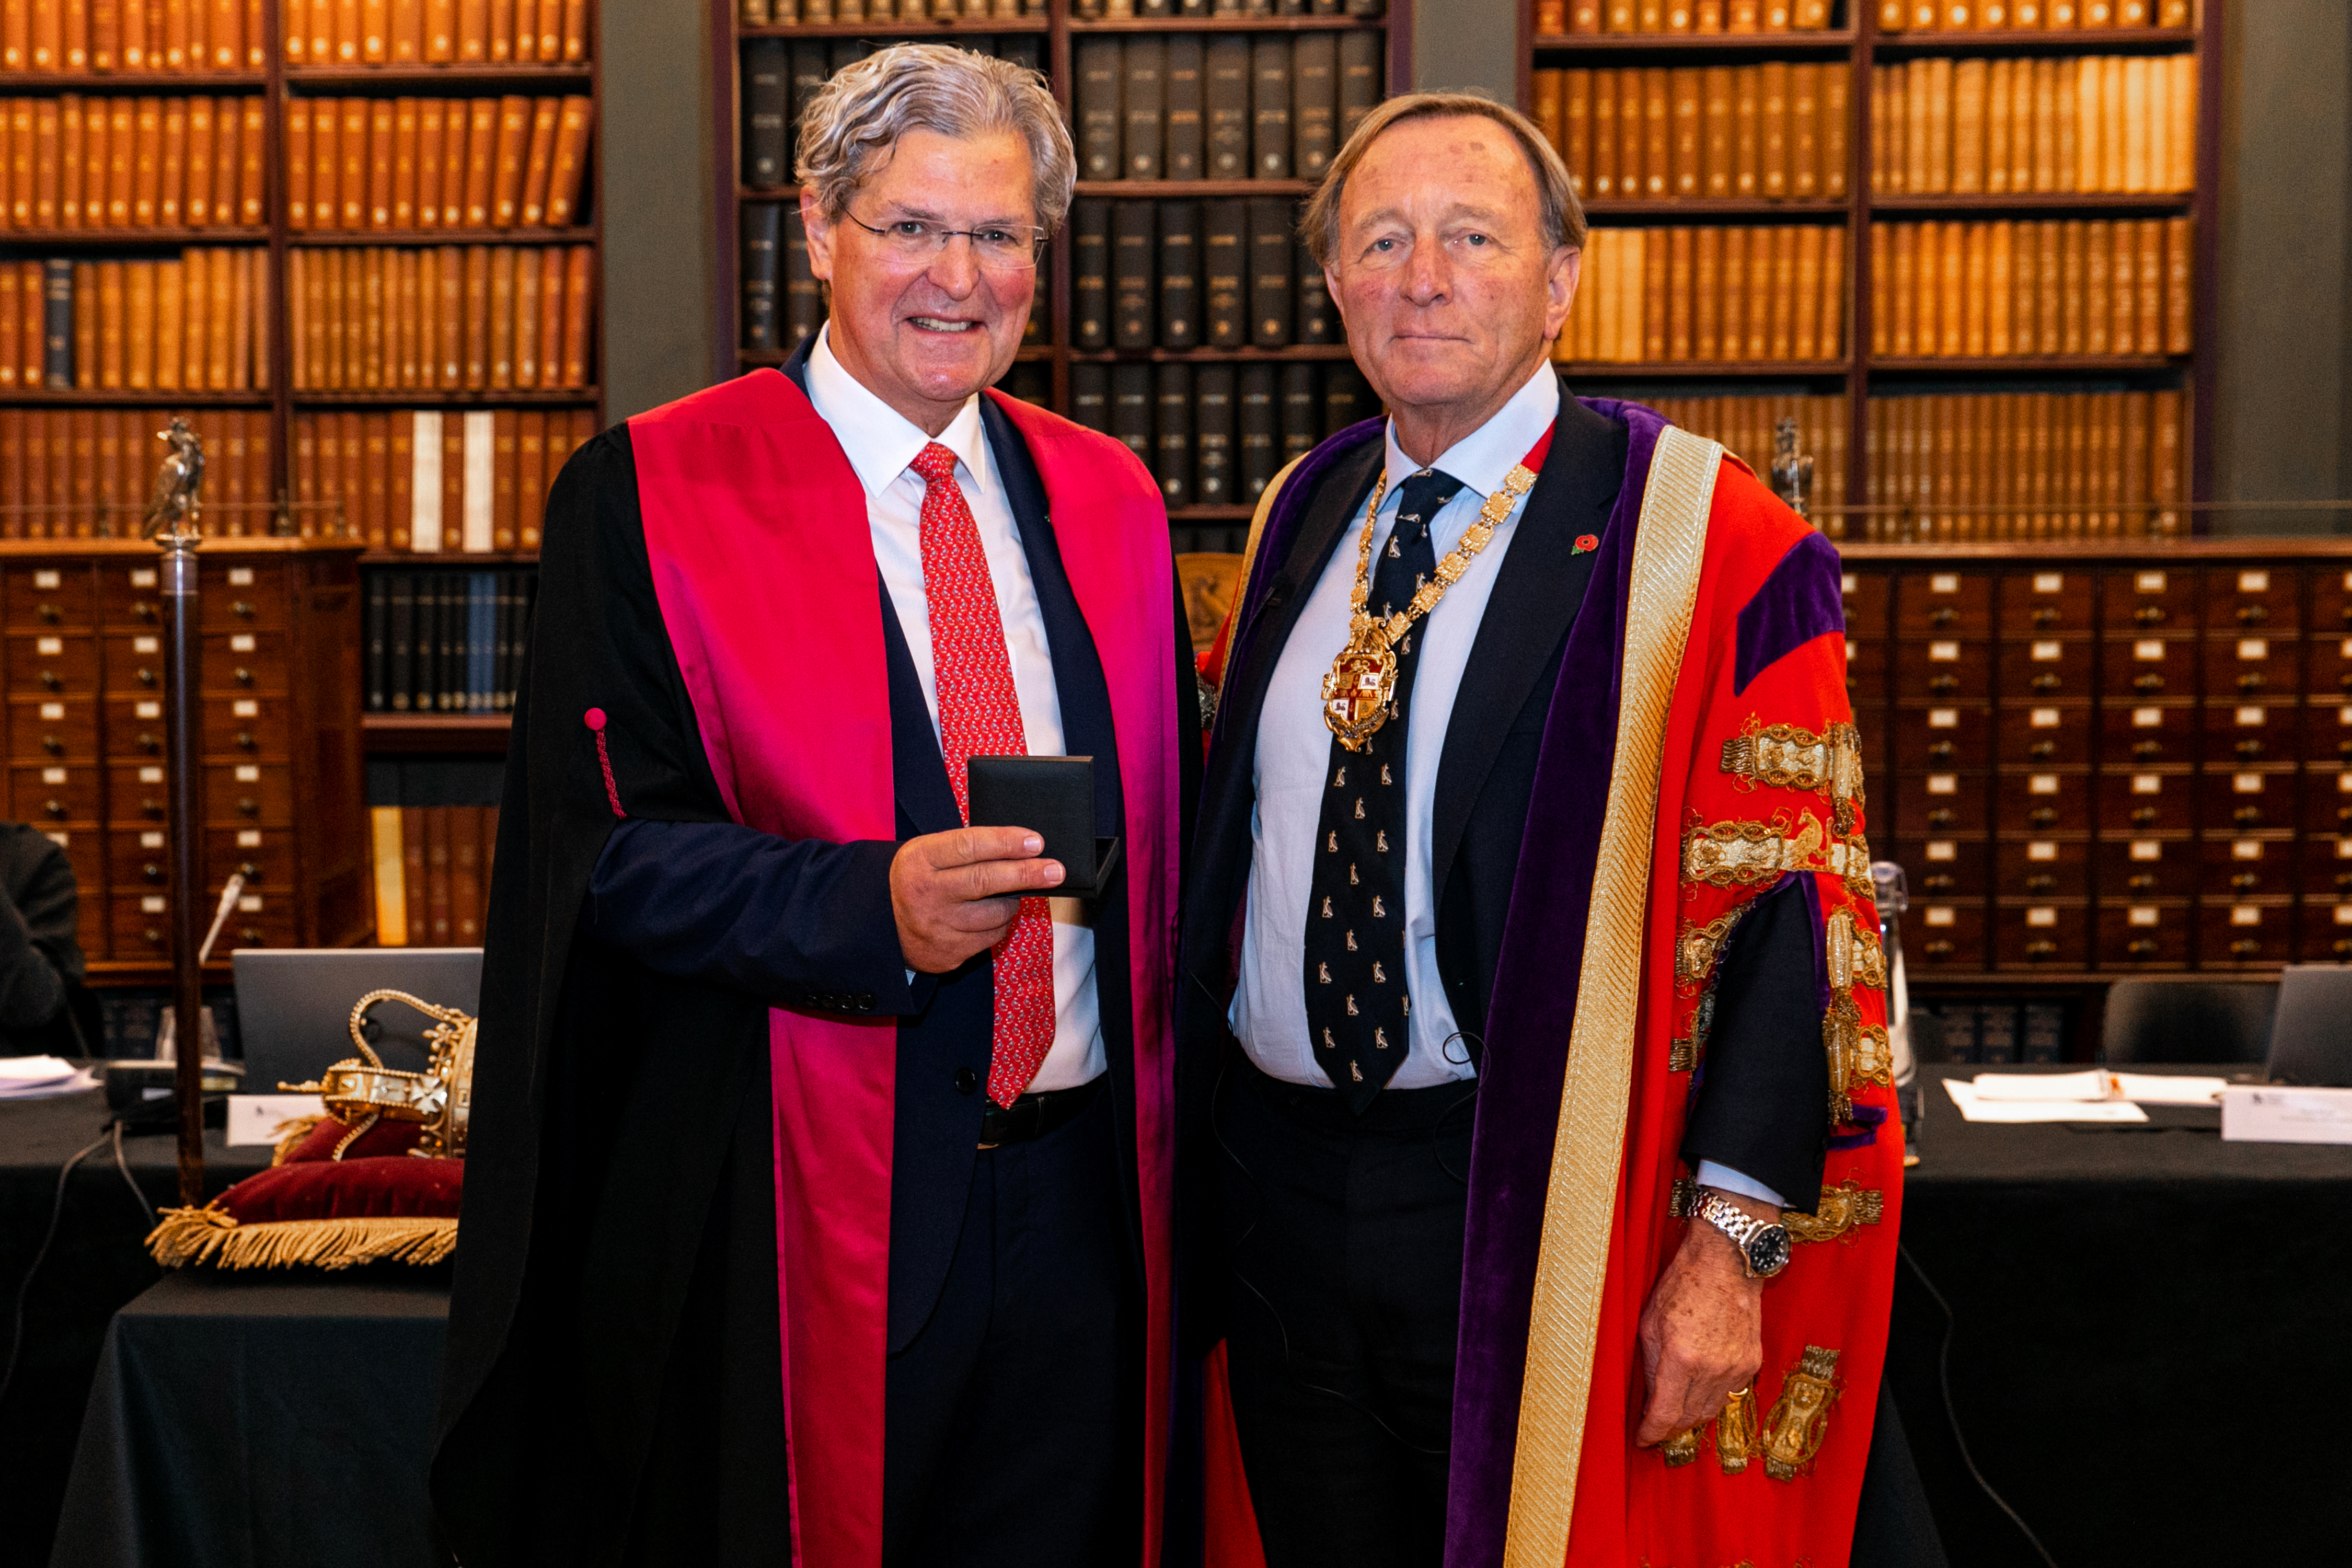 Merv the President of Royal College of Surgeons - Professor Neil Mortensen. They are wearing traditional gowns and standing side by side. Merv holds the box containing his medal